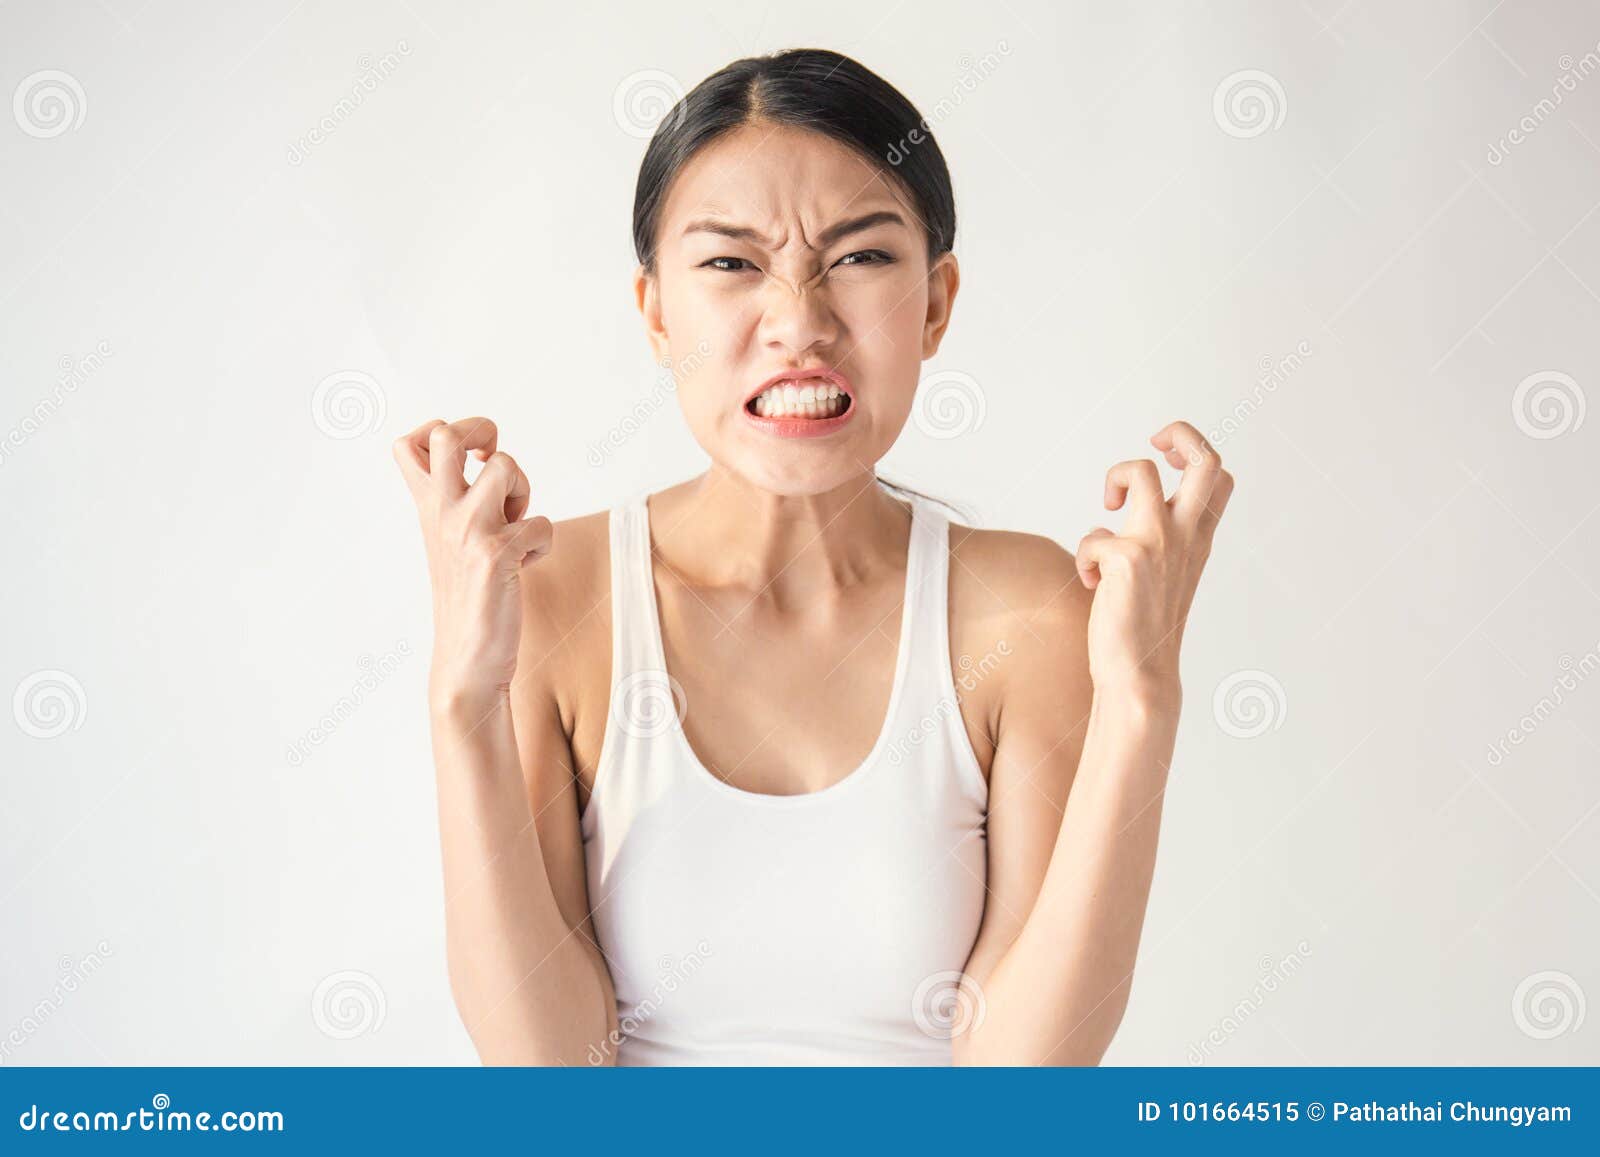 portrait of angry pensive mad crazy asian woman screaming out expression, facial